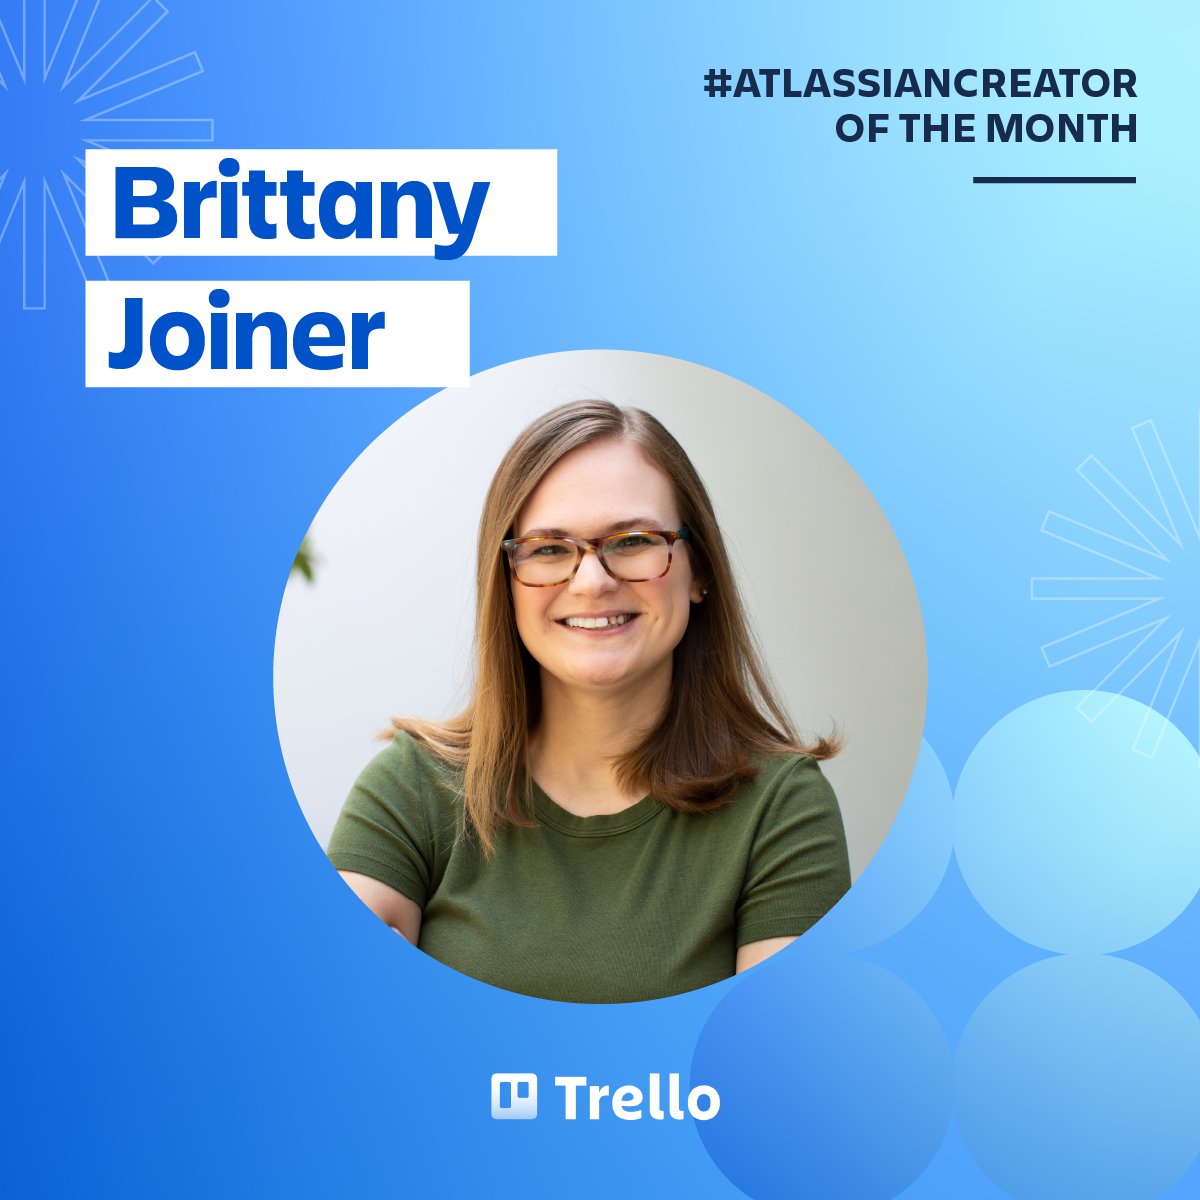 A huge congrats and thank you to our February #AtlassianCreator of the Month, @brittany_joiner! 👏🏾 Follow Brittany here on Twitter and over on LinkedIn for more Atlassian brain food. ✨🧠 Now we’re extra excited to see what the #AtlassianCreators have in store for March... 👀